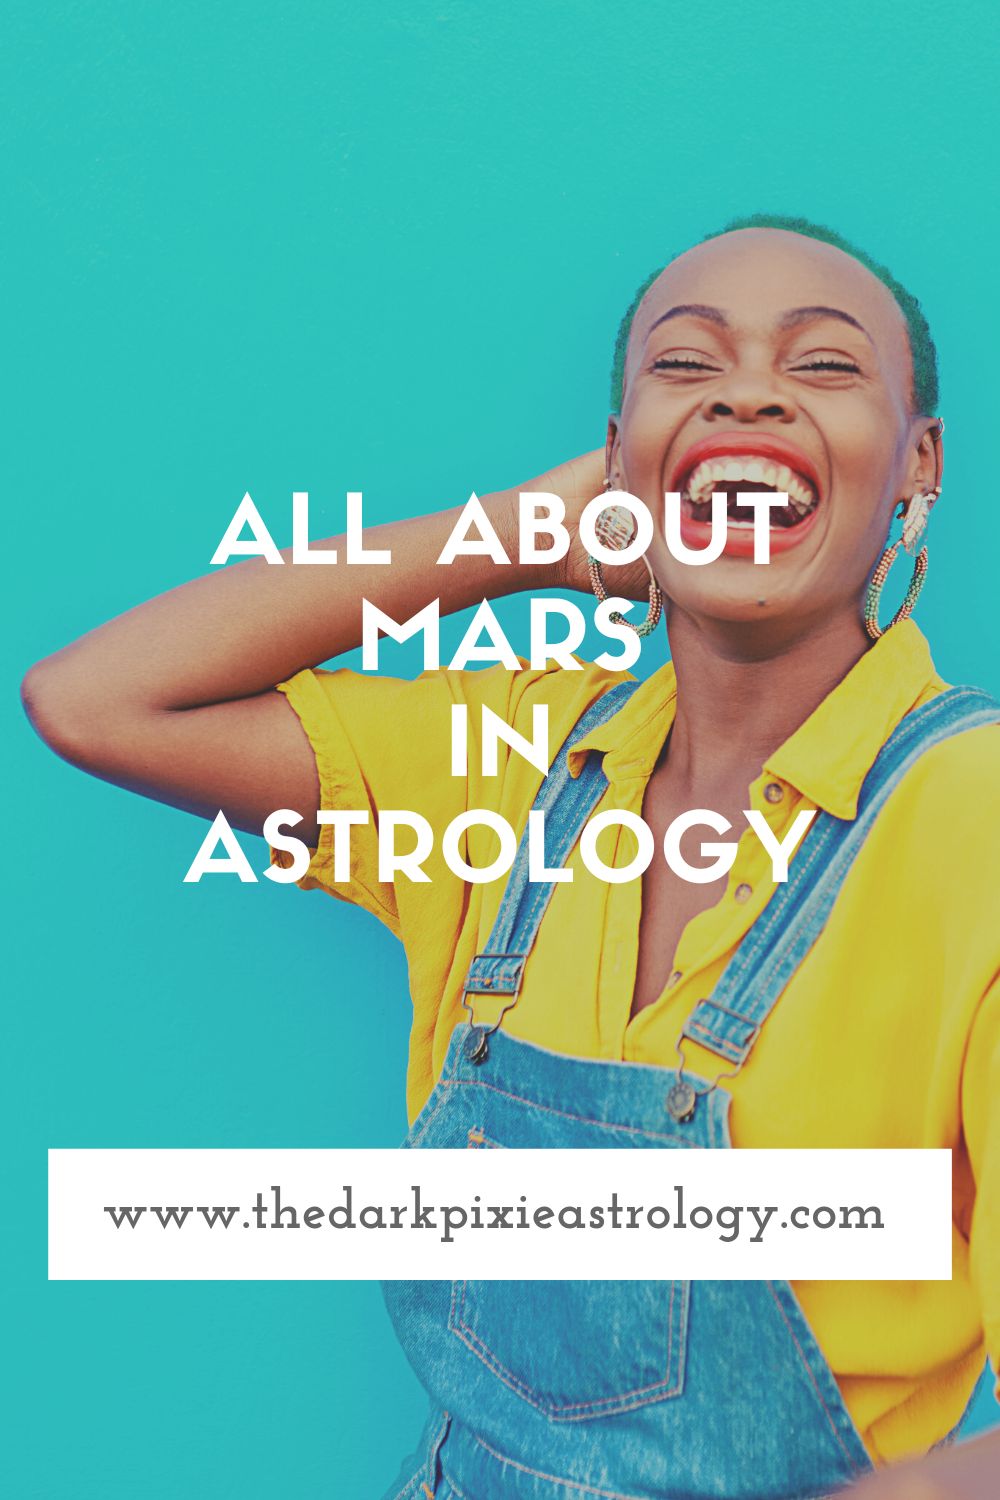 All About Mars in Astrology - The Dark Pixie Astrology